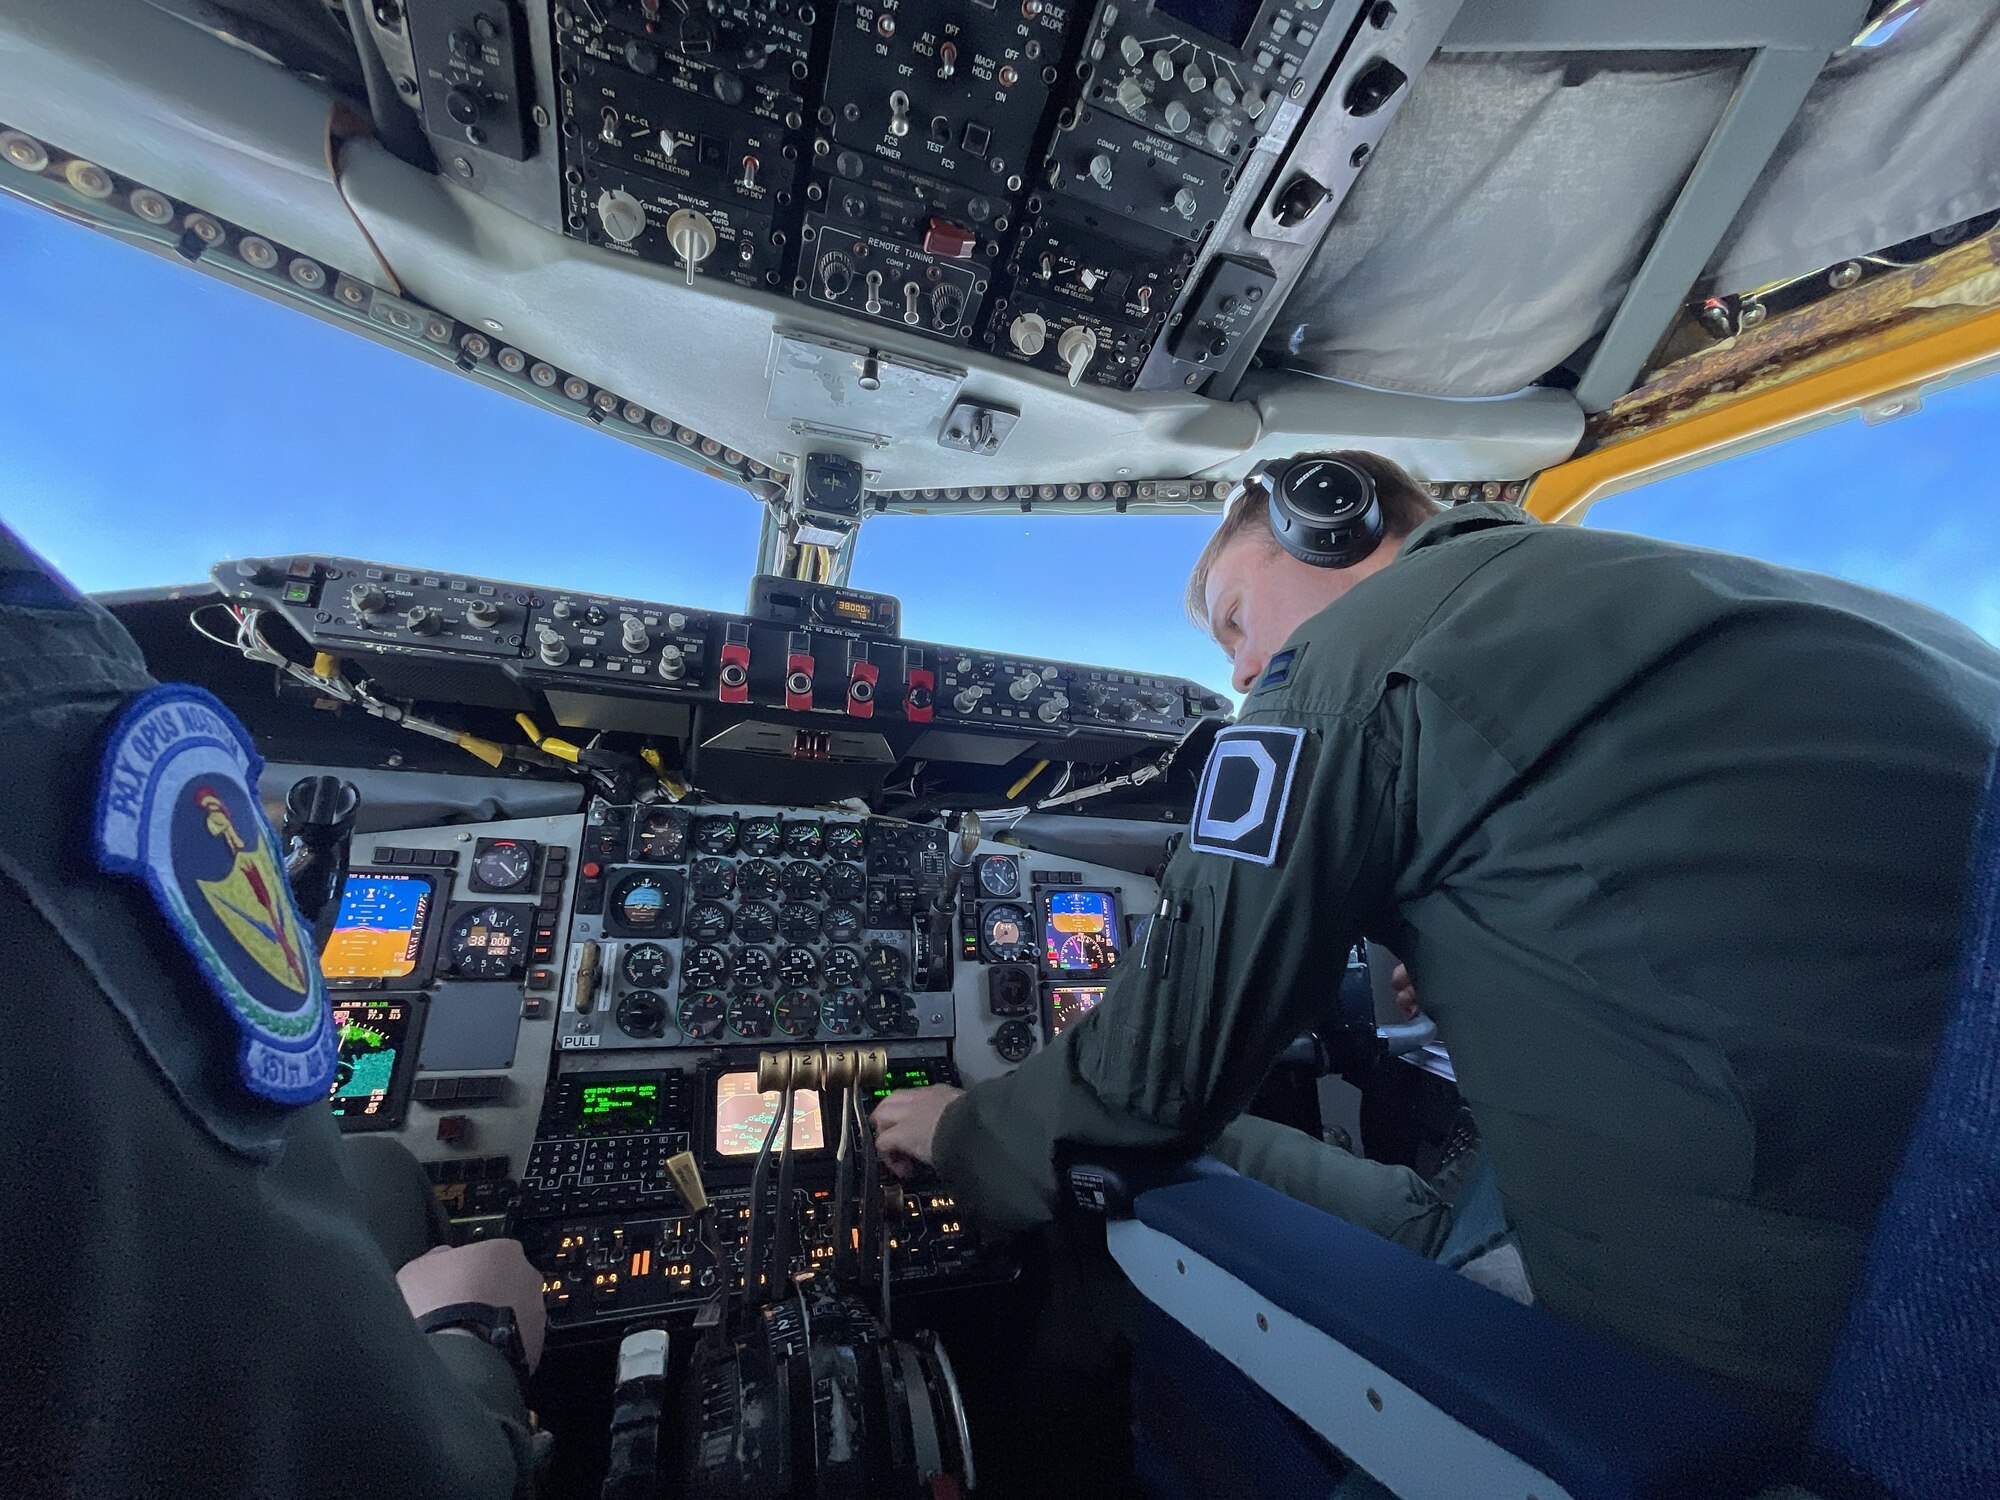 U.S. Air Force Capt. James Winegardner, 351st Air Refueling Squadron pilot, flies a KC-135 Stratotanker aircraft during a bomber task force mission over Europe, Sept. 8, 2021. The U.S. Air Force is engaged, postured, and ready with credible force to assure, deter, and defend in an increasingly complex security environment. (U.S. Air Force photo by Senior Airman Joseph Barron)